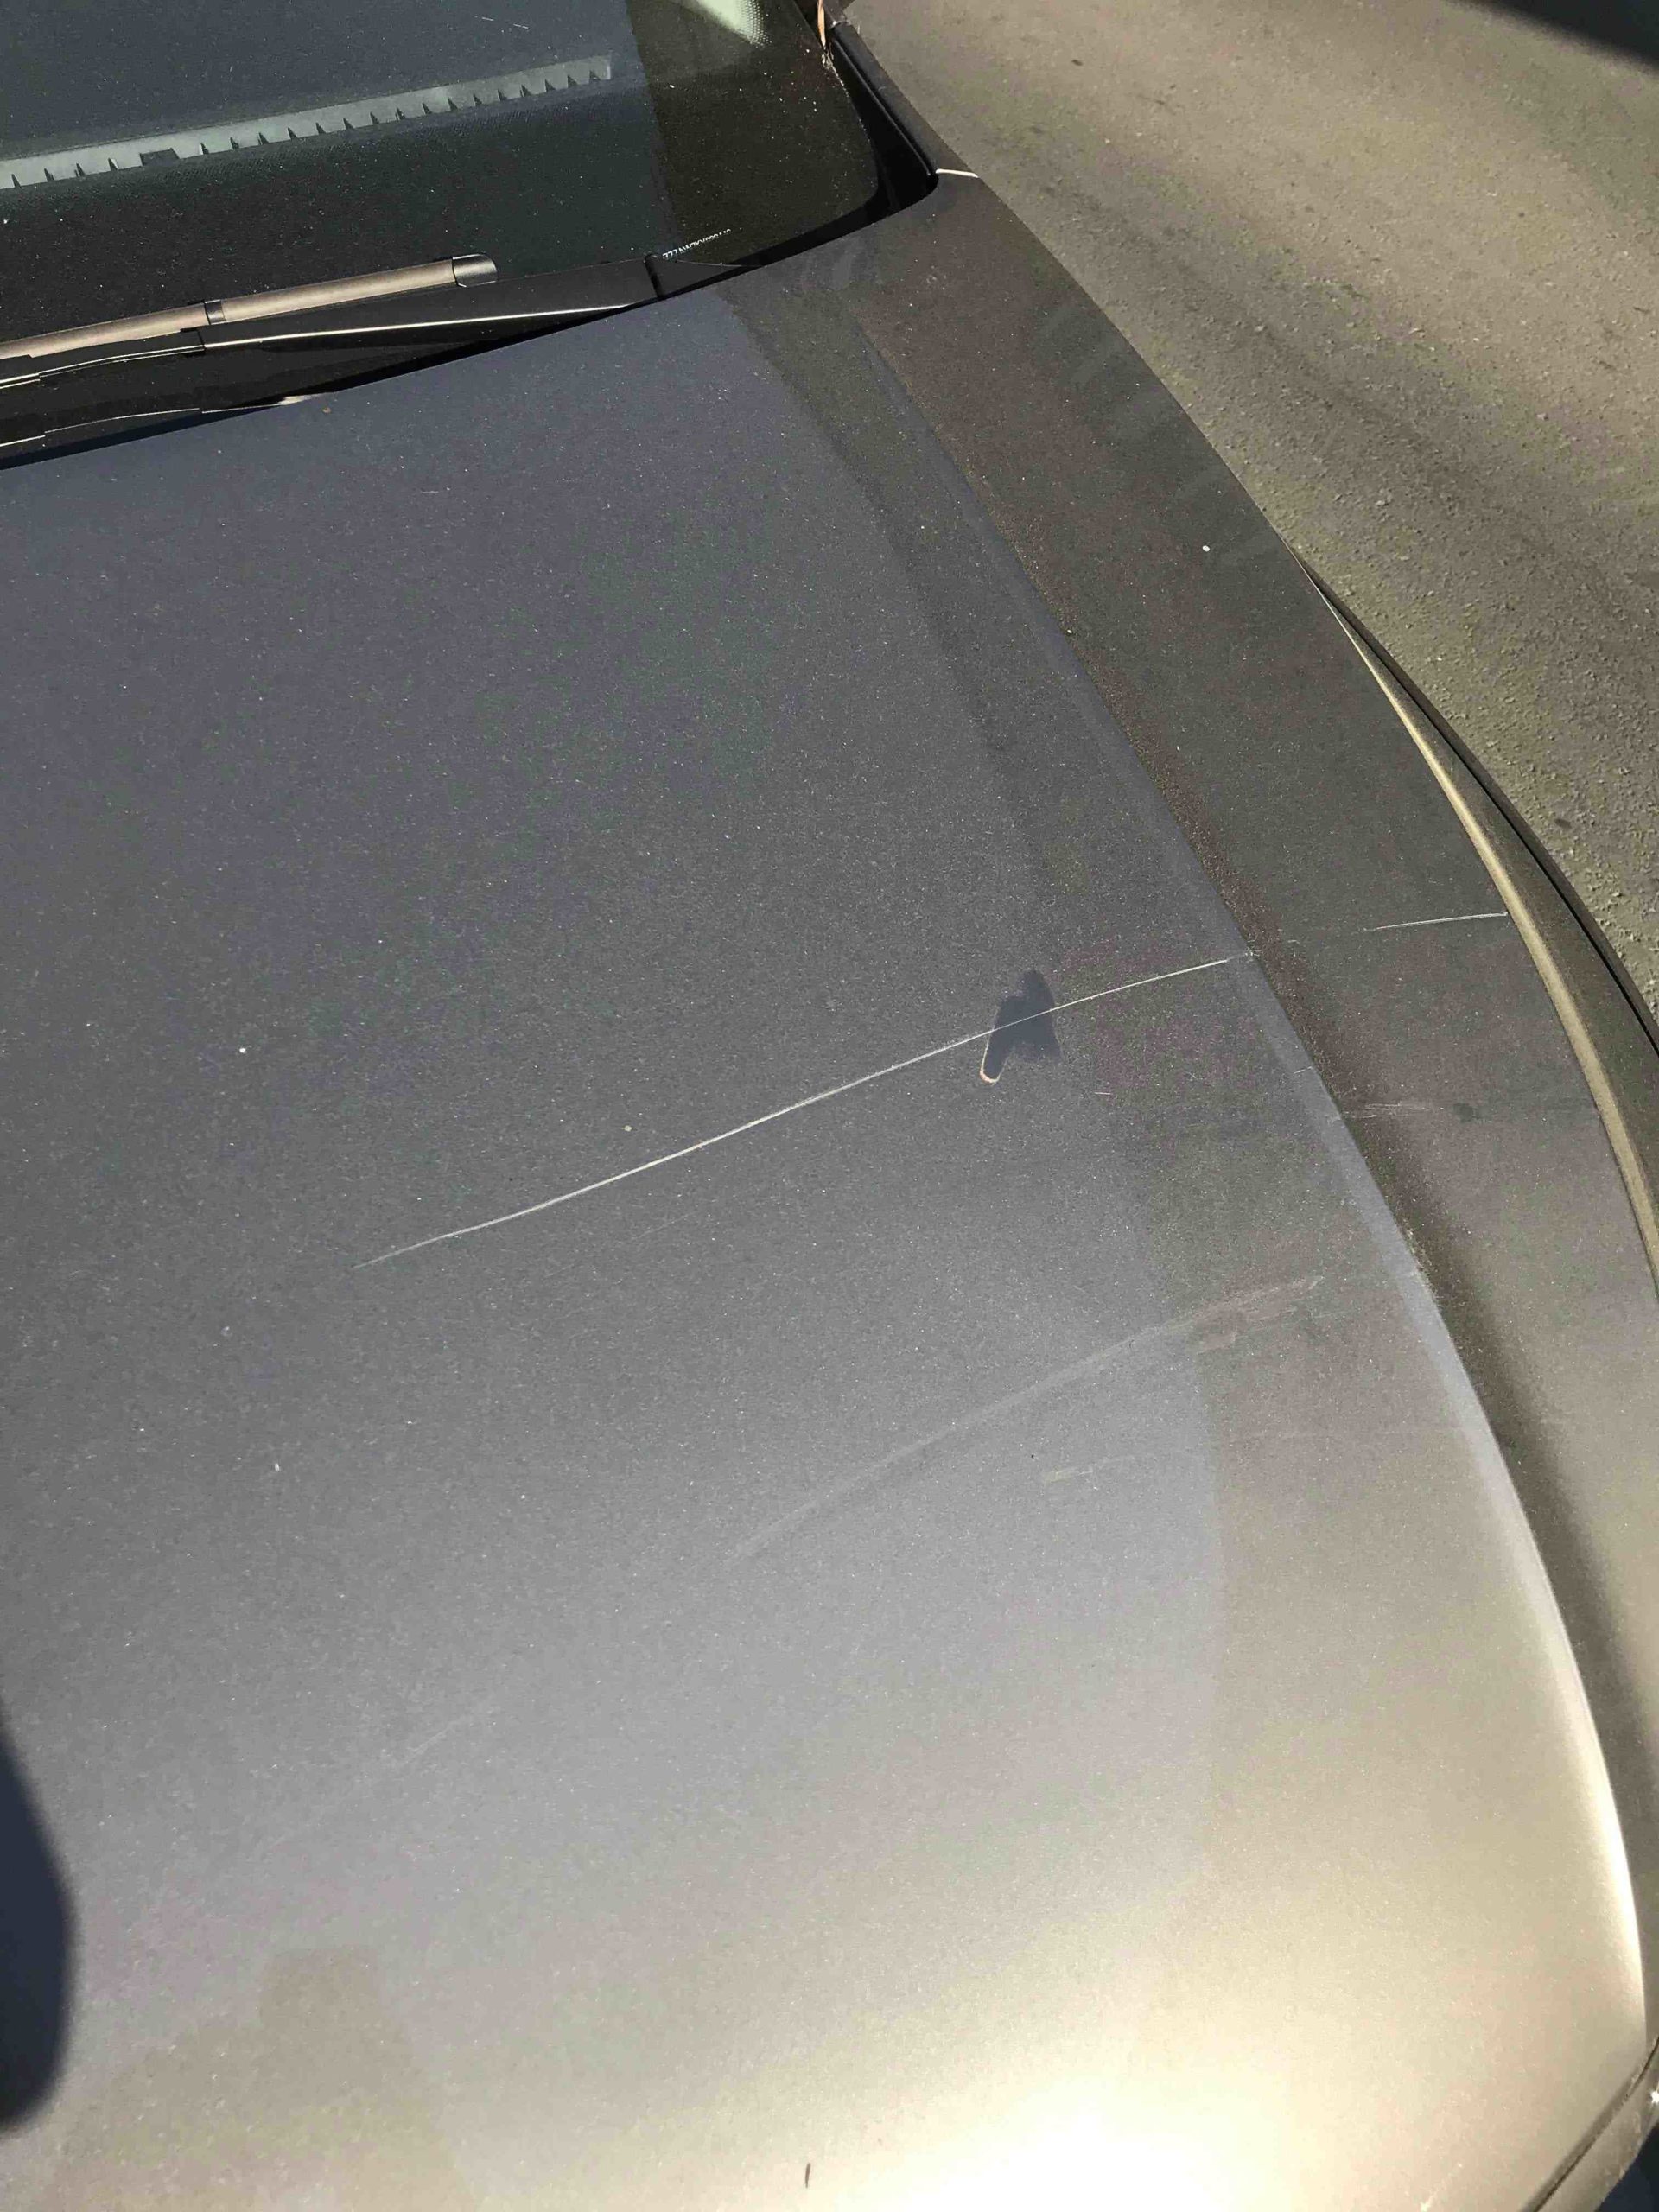 What should I do if someone scratches my car?